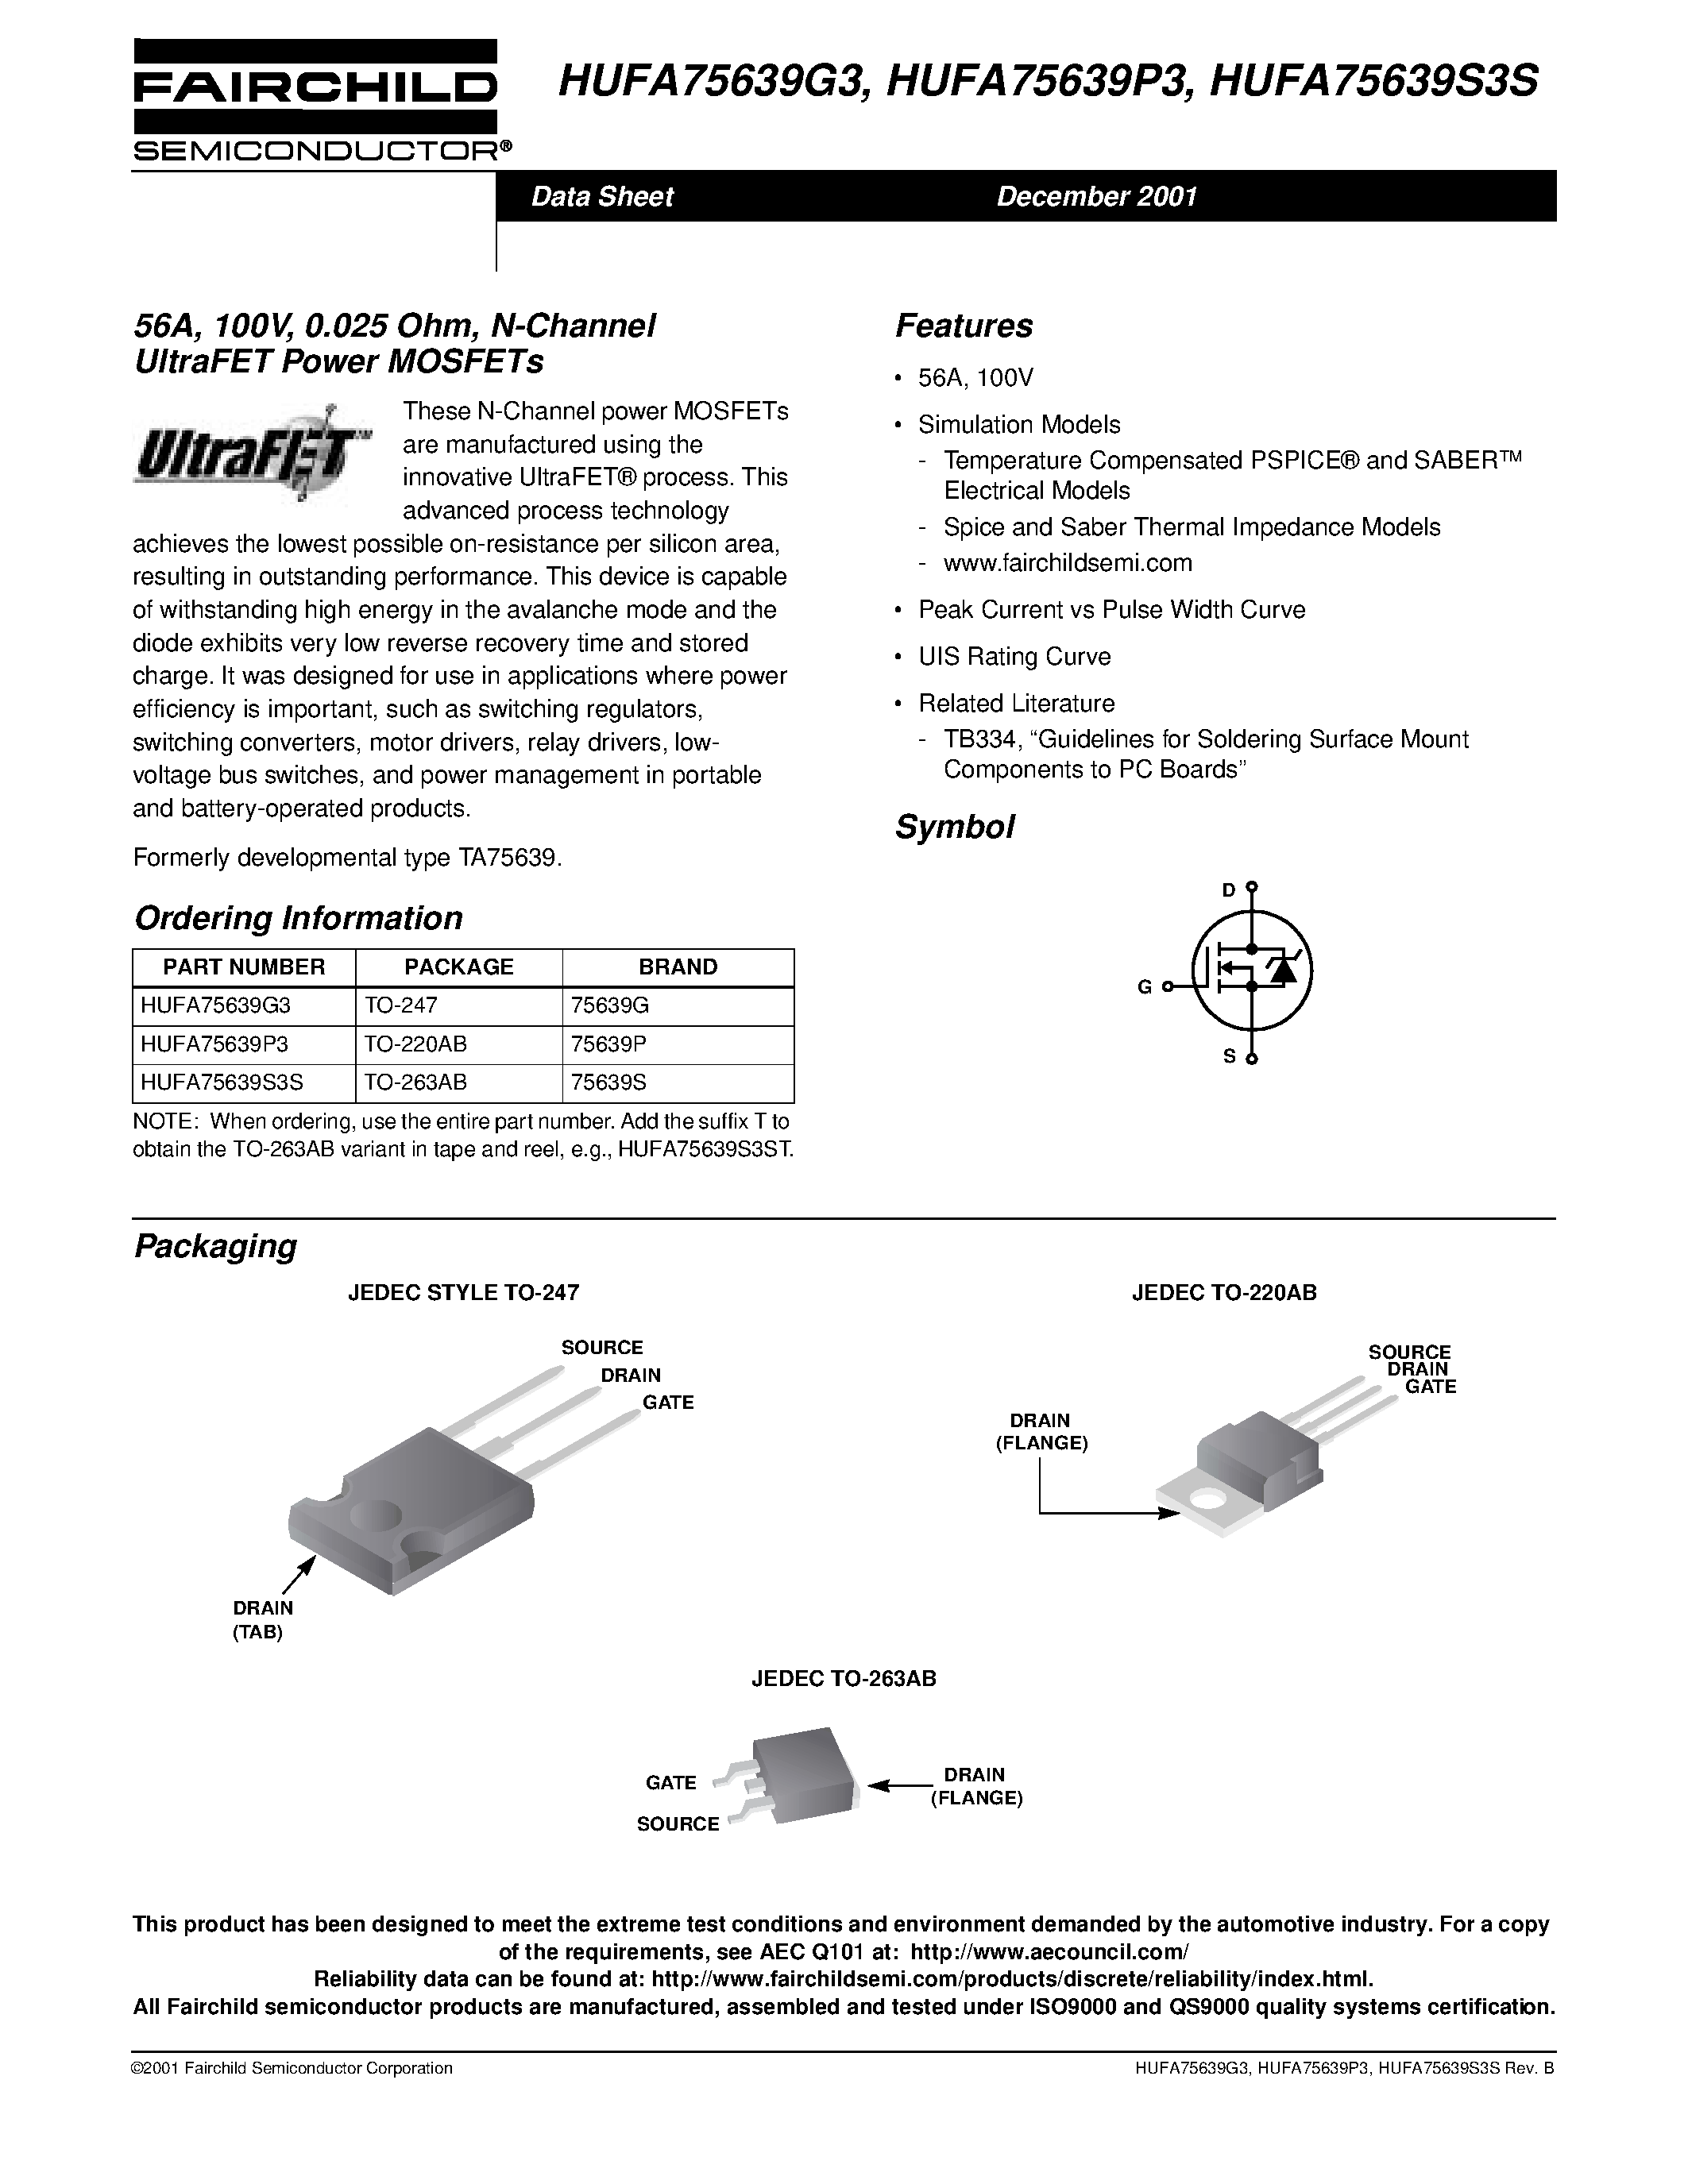 Datasheet HUFA75639S3S - 56A/ 100V/ 0.025 Ohm/ N-Channel UltraFET Power MOSFETs page 1